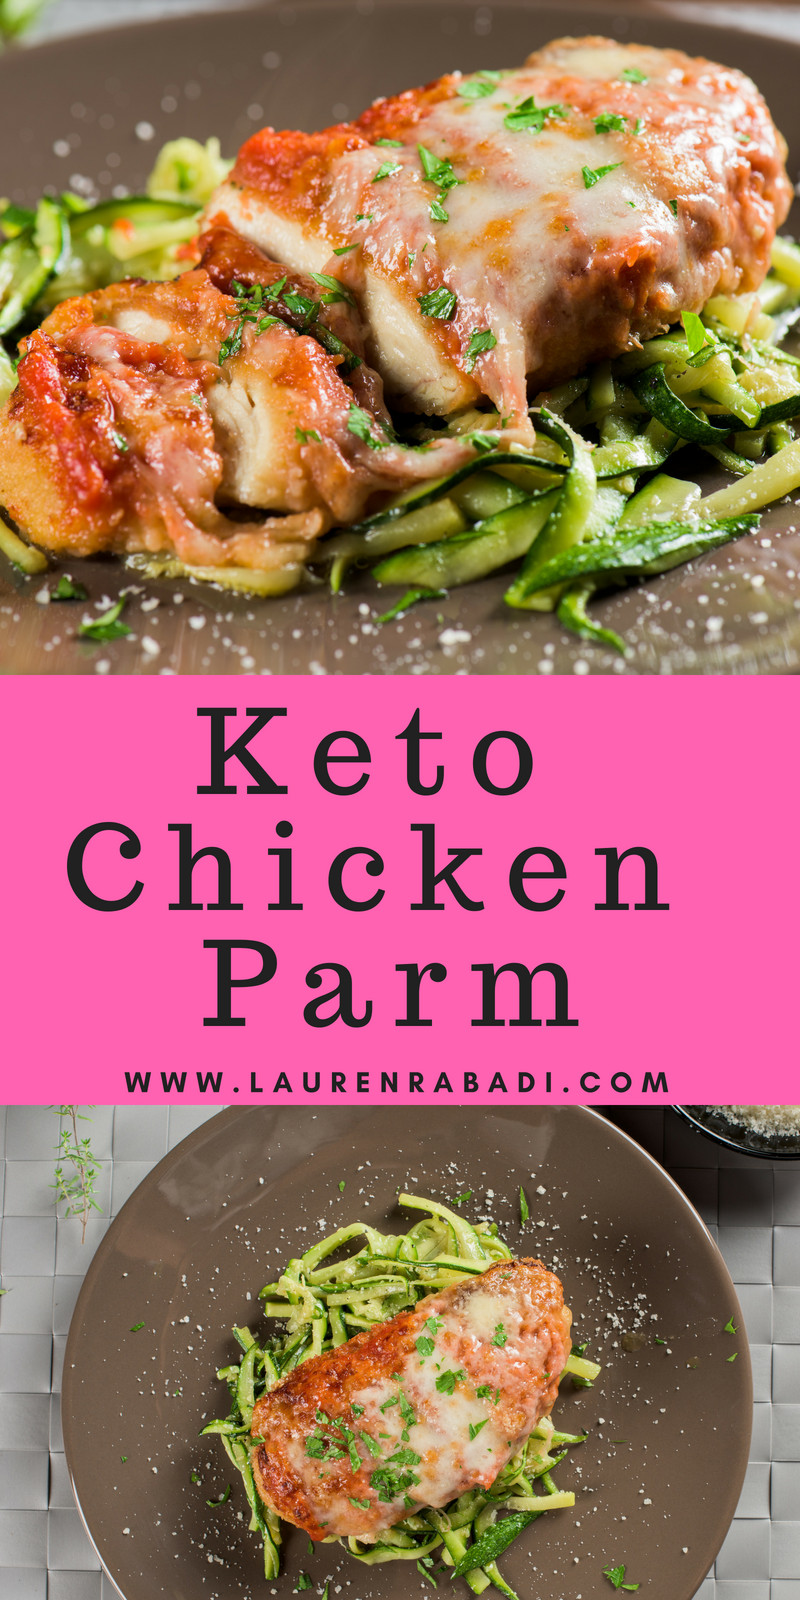 Keto Diet For Beginners Chicken Keto Chicken Parm Let s Do Keto To her